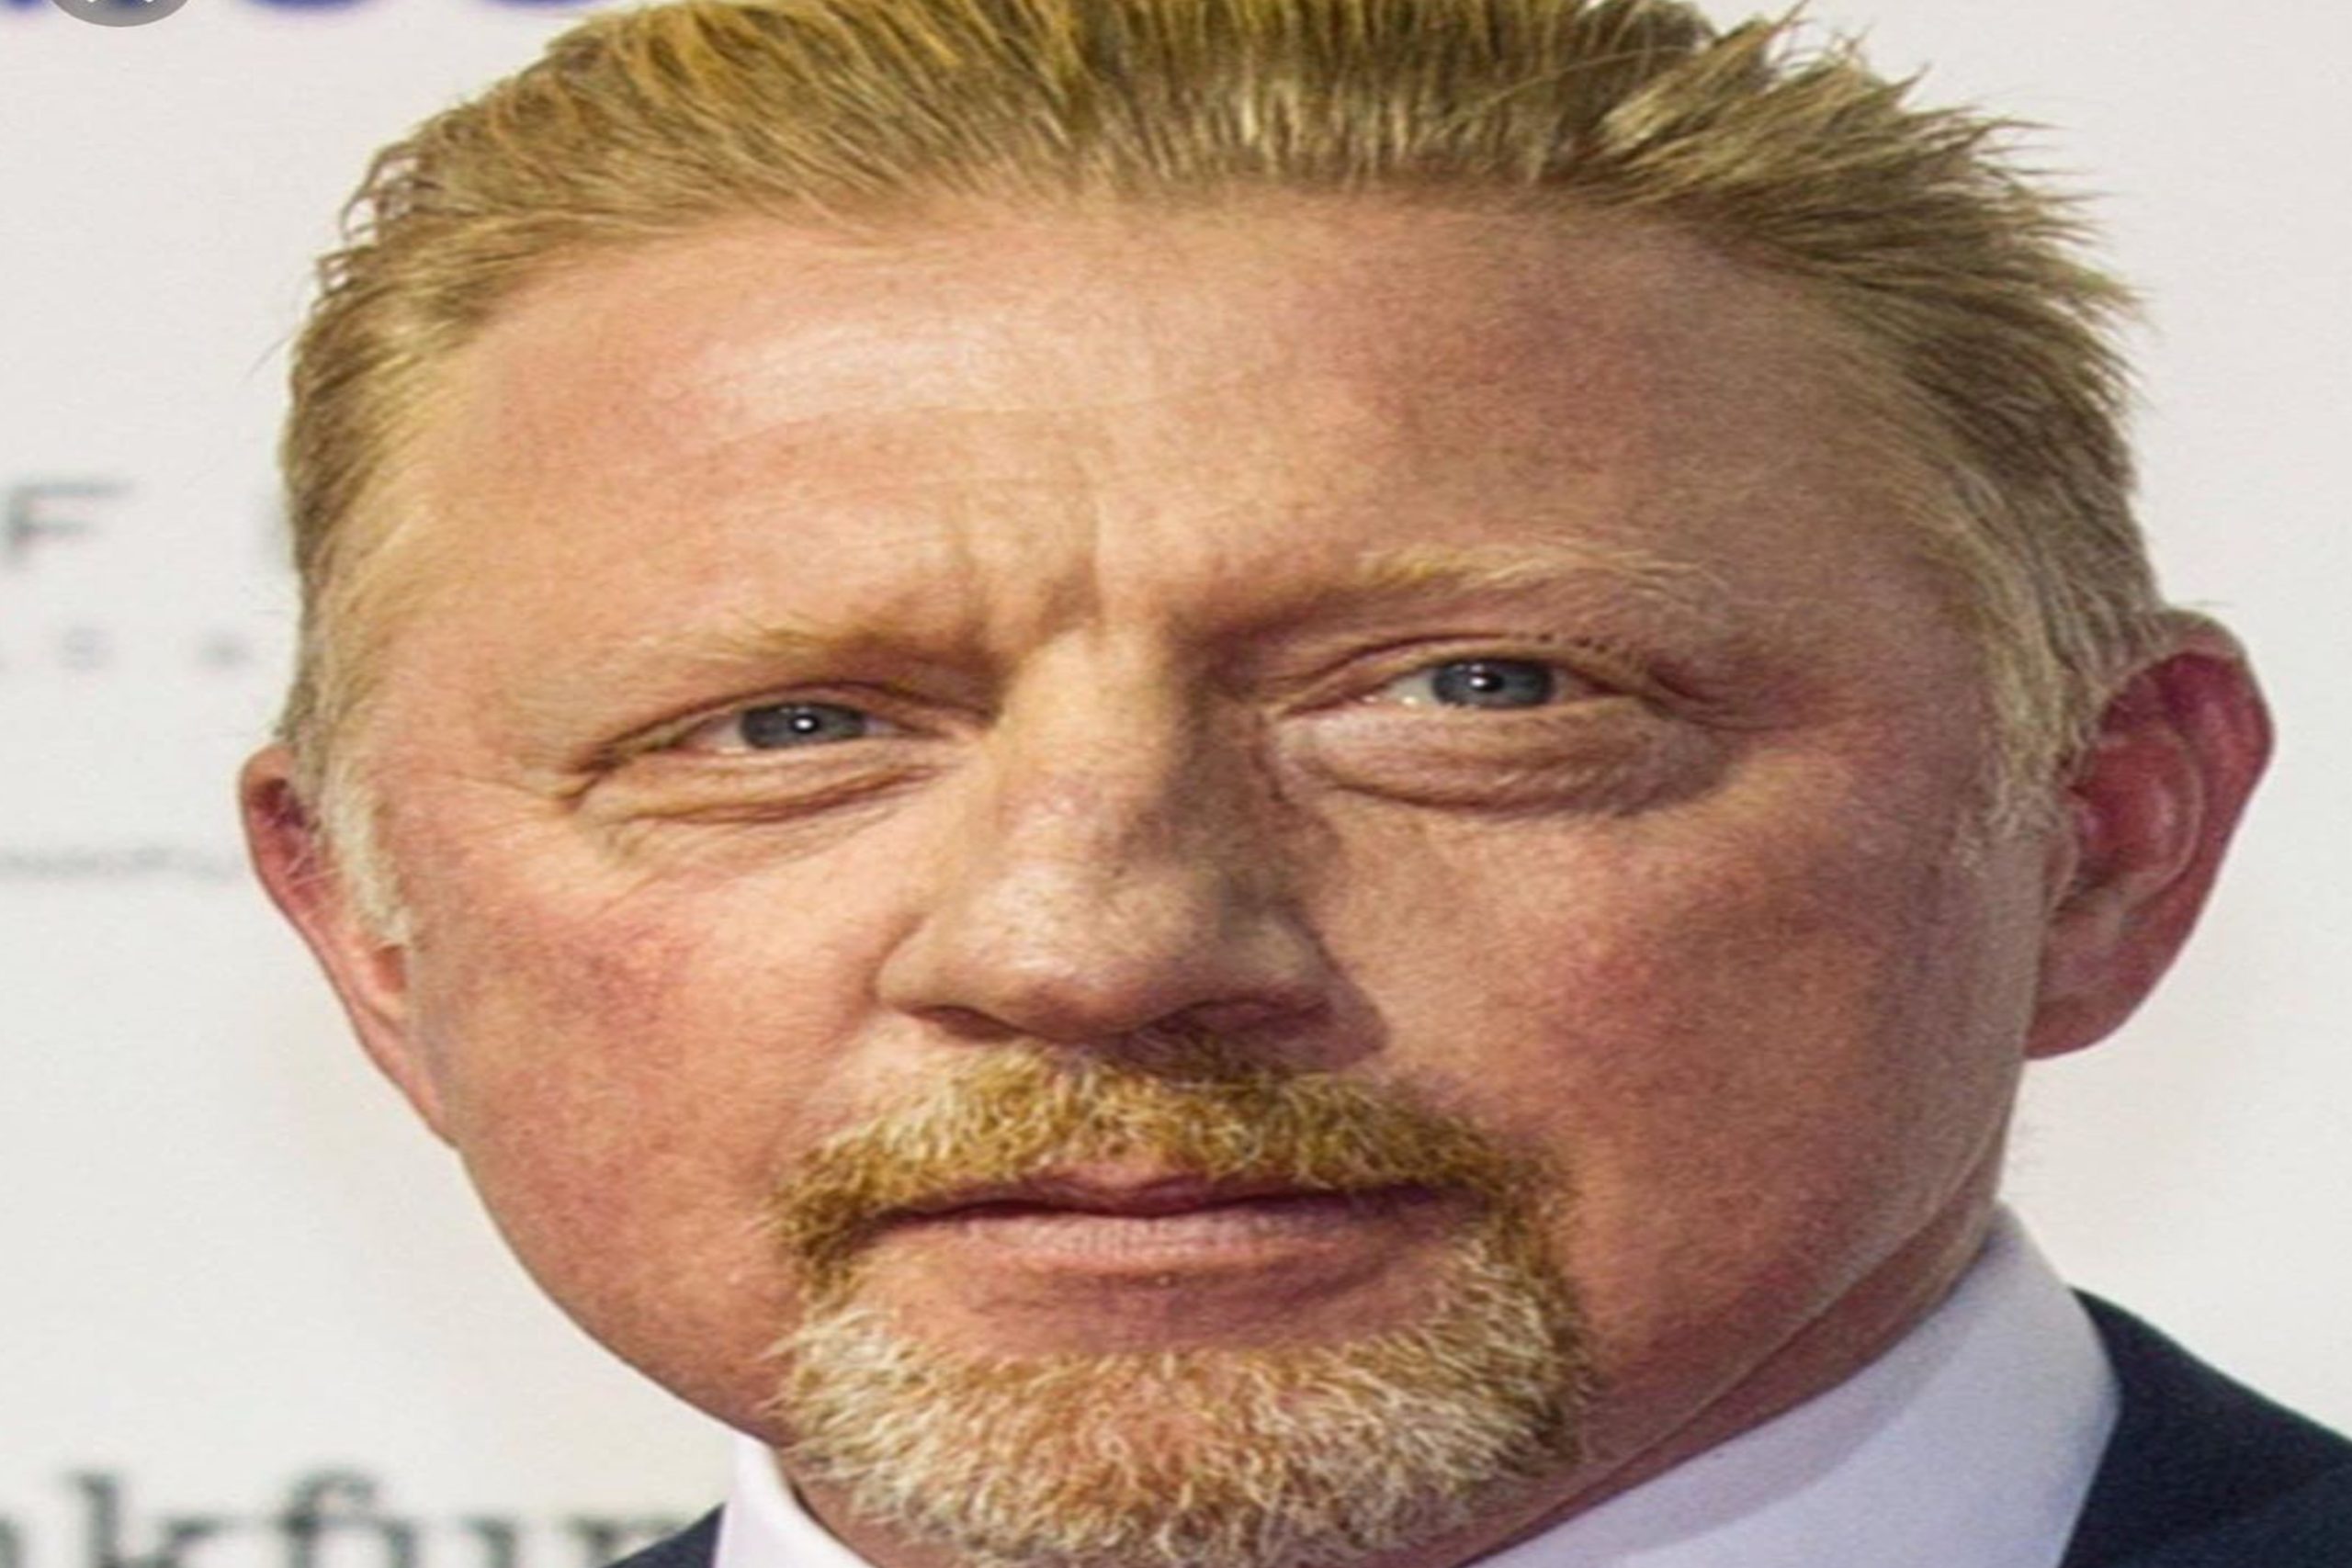 Watch: Celebrity Boris Becker insists that prison has made him “stronger”  after being released for 2.5 million dollars in bankruptcy fraud